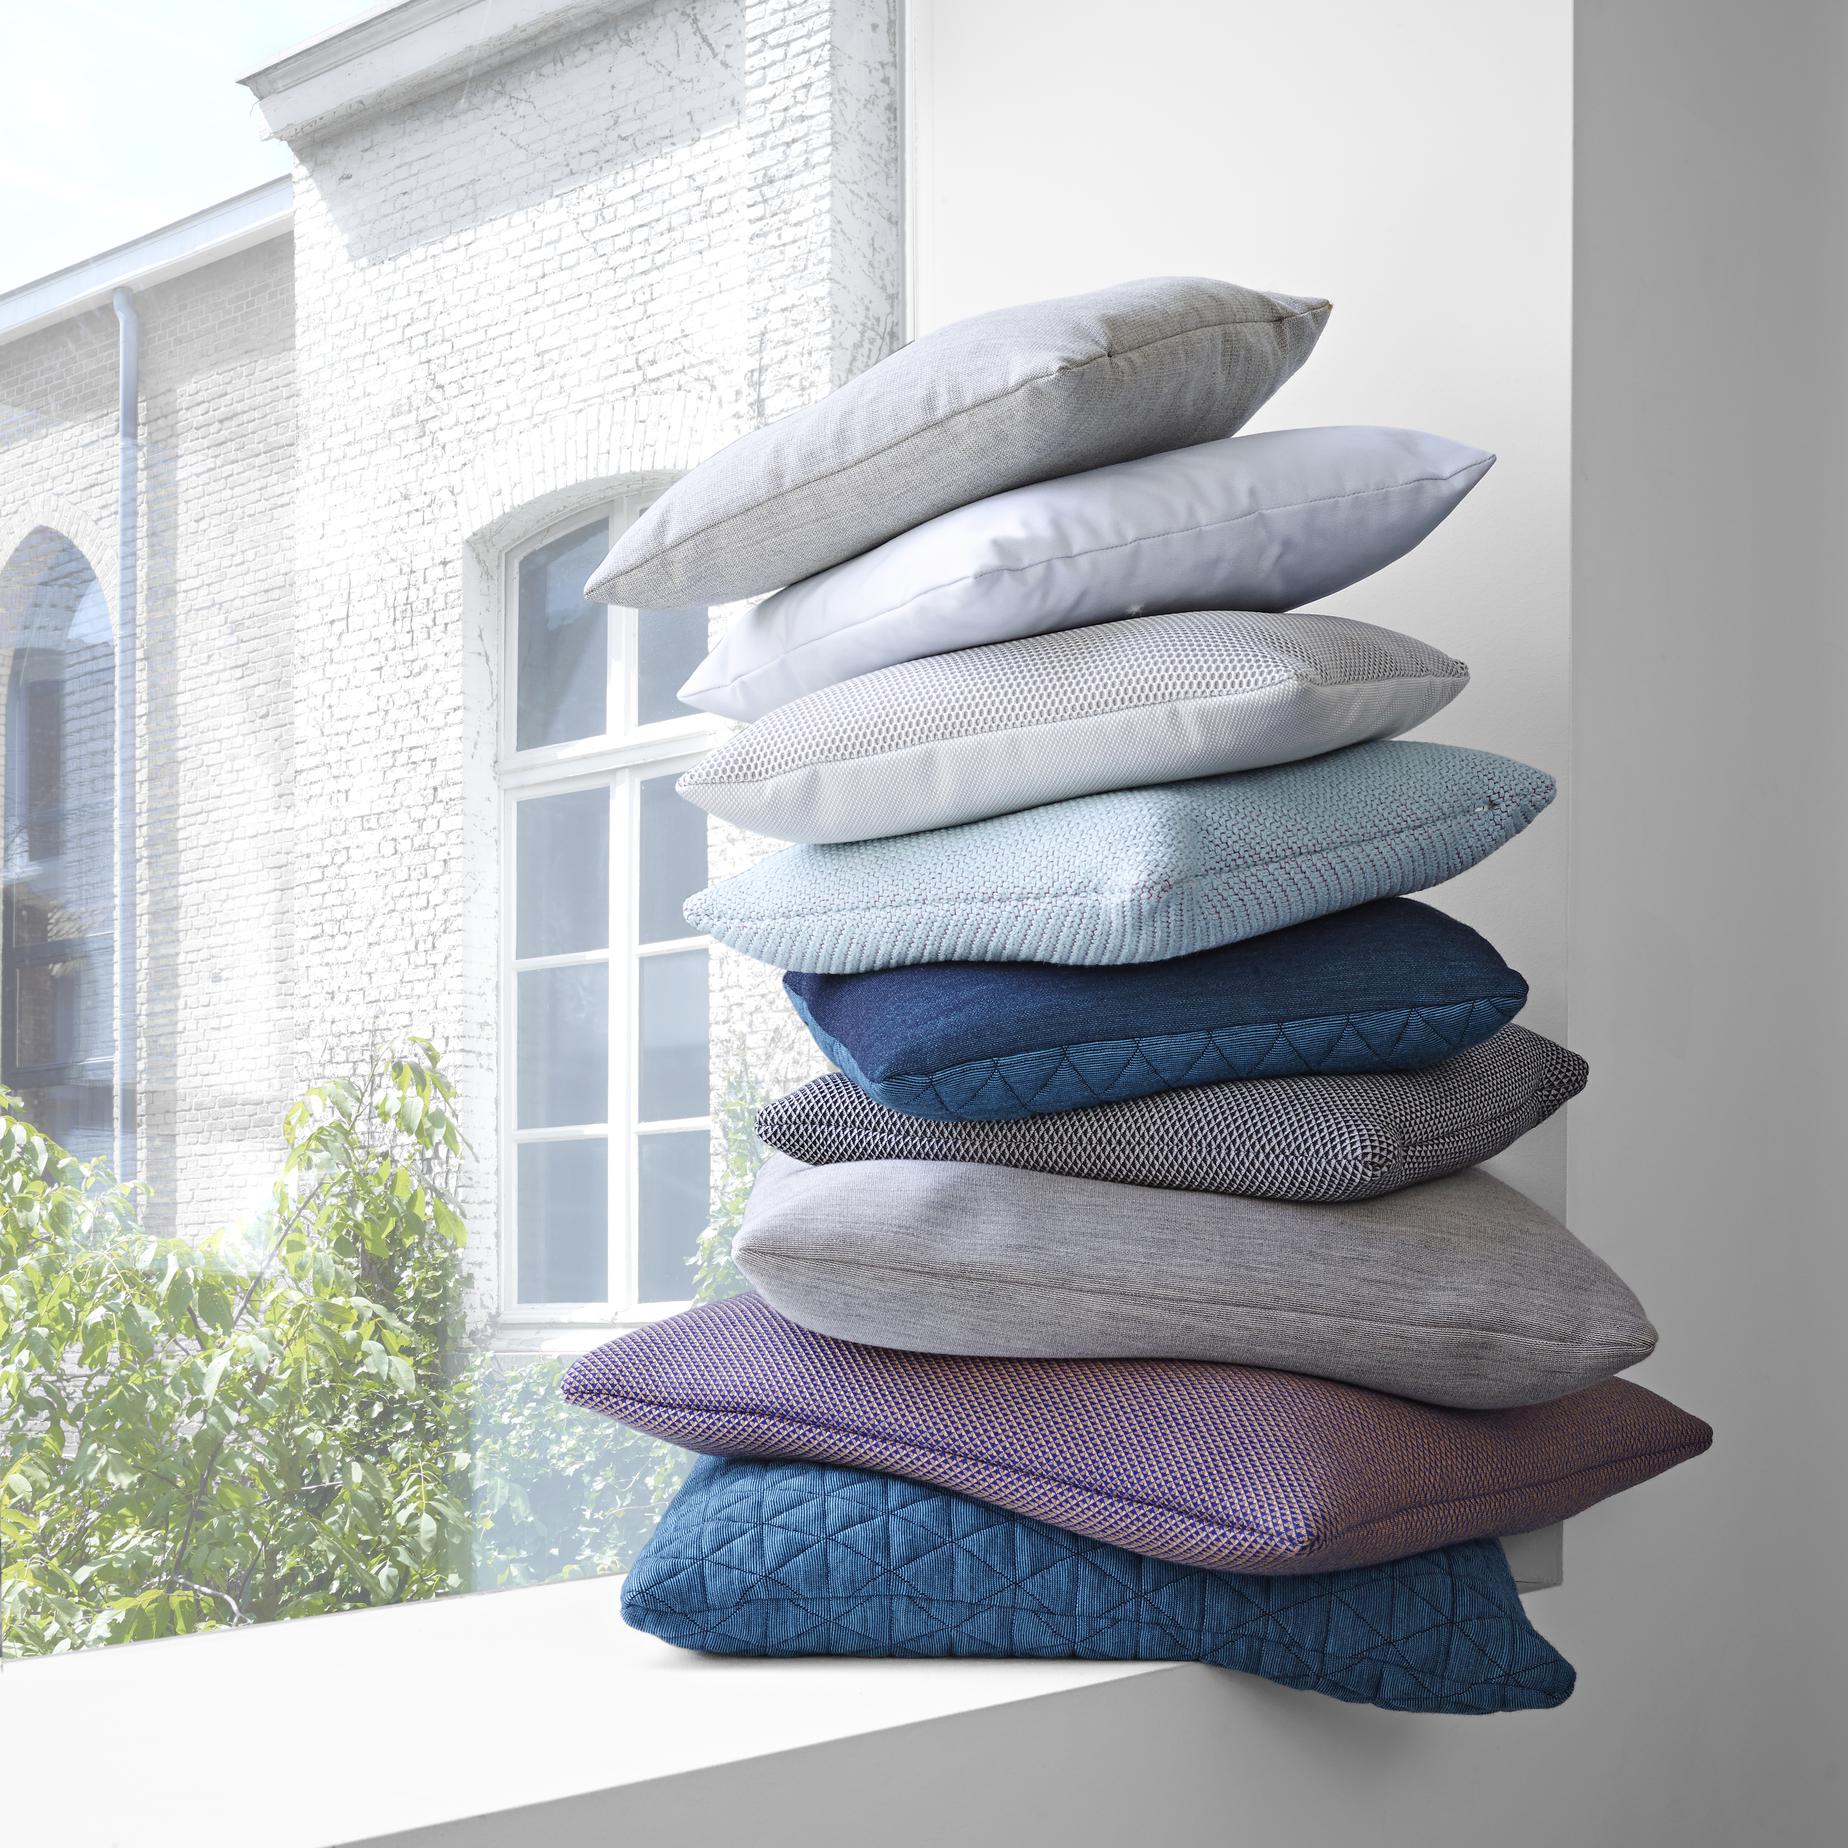 cLigne-Roset Ushions-And-Cushion-Covers